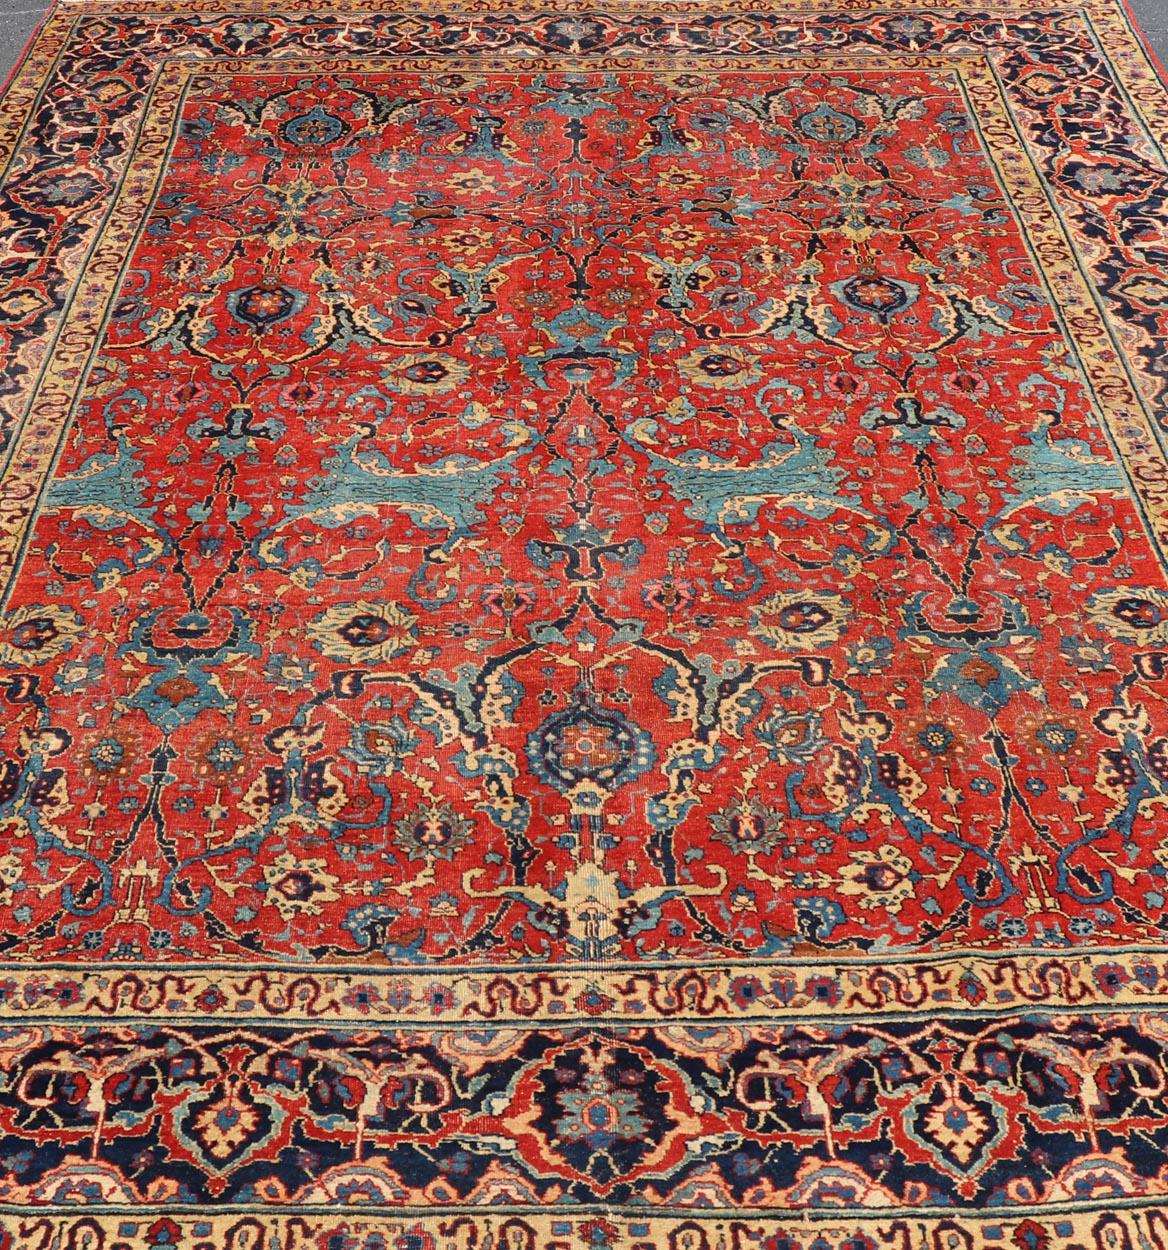 Persian Antique Tabriz Rug with All Over Design in Rust Red, Blue's, Yellow, and L. Blue For Sale